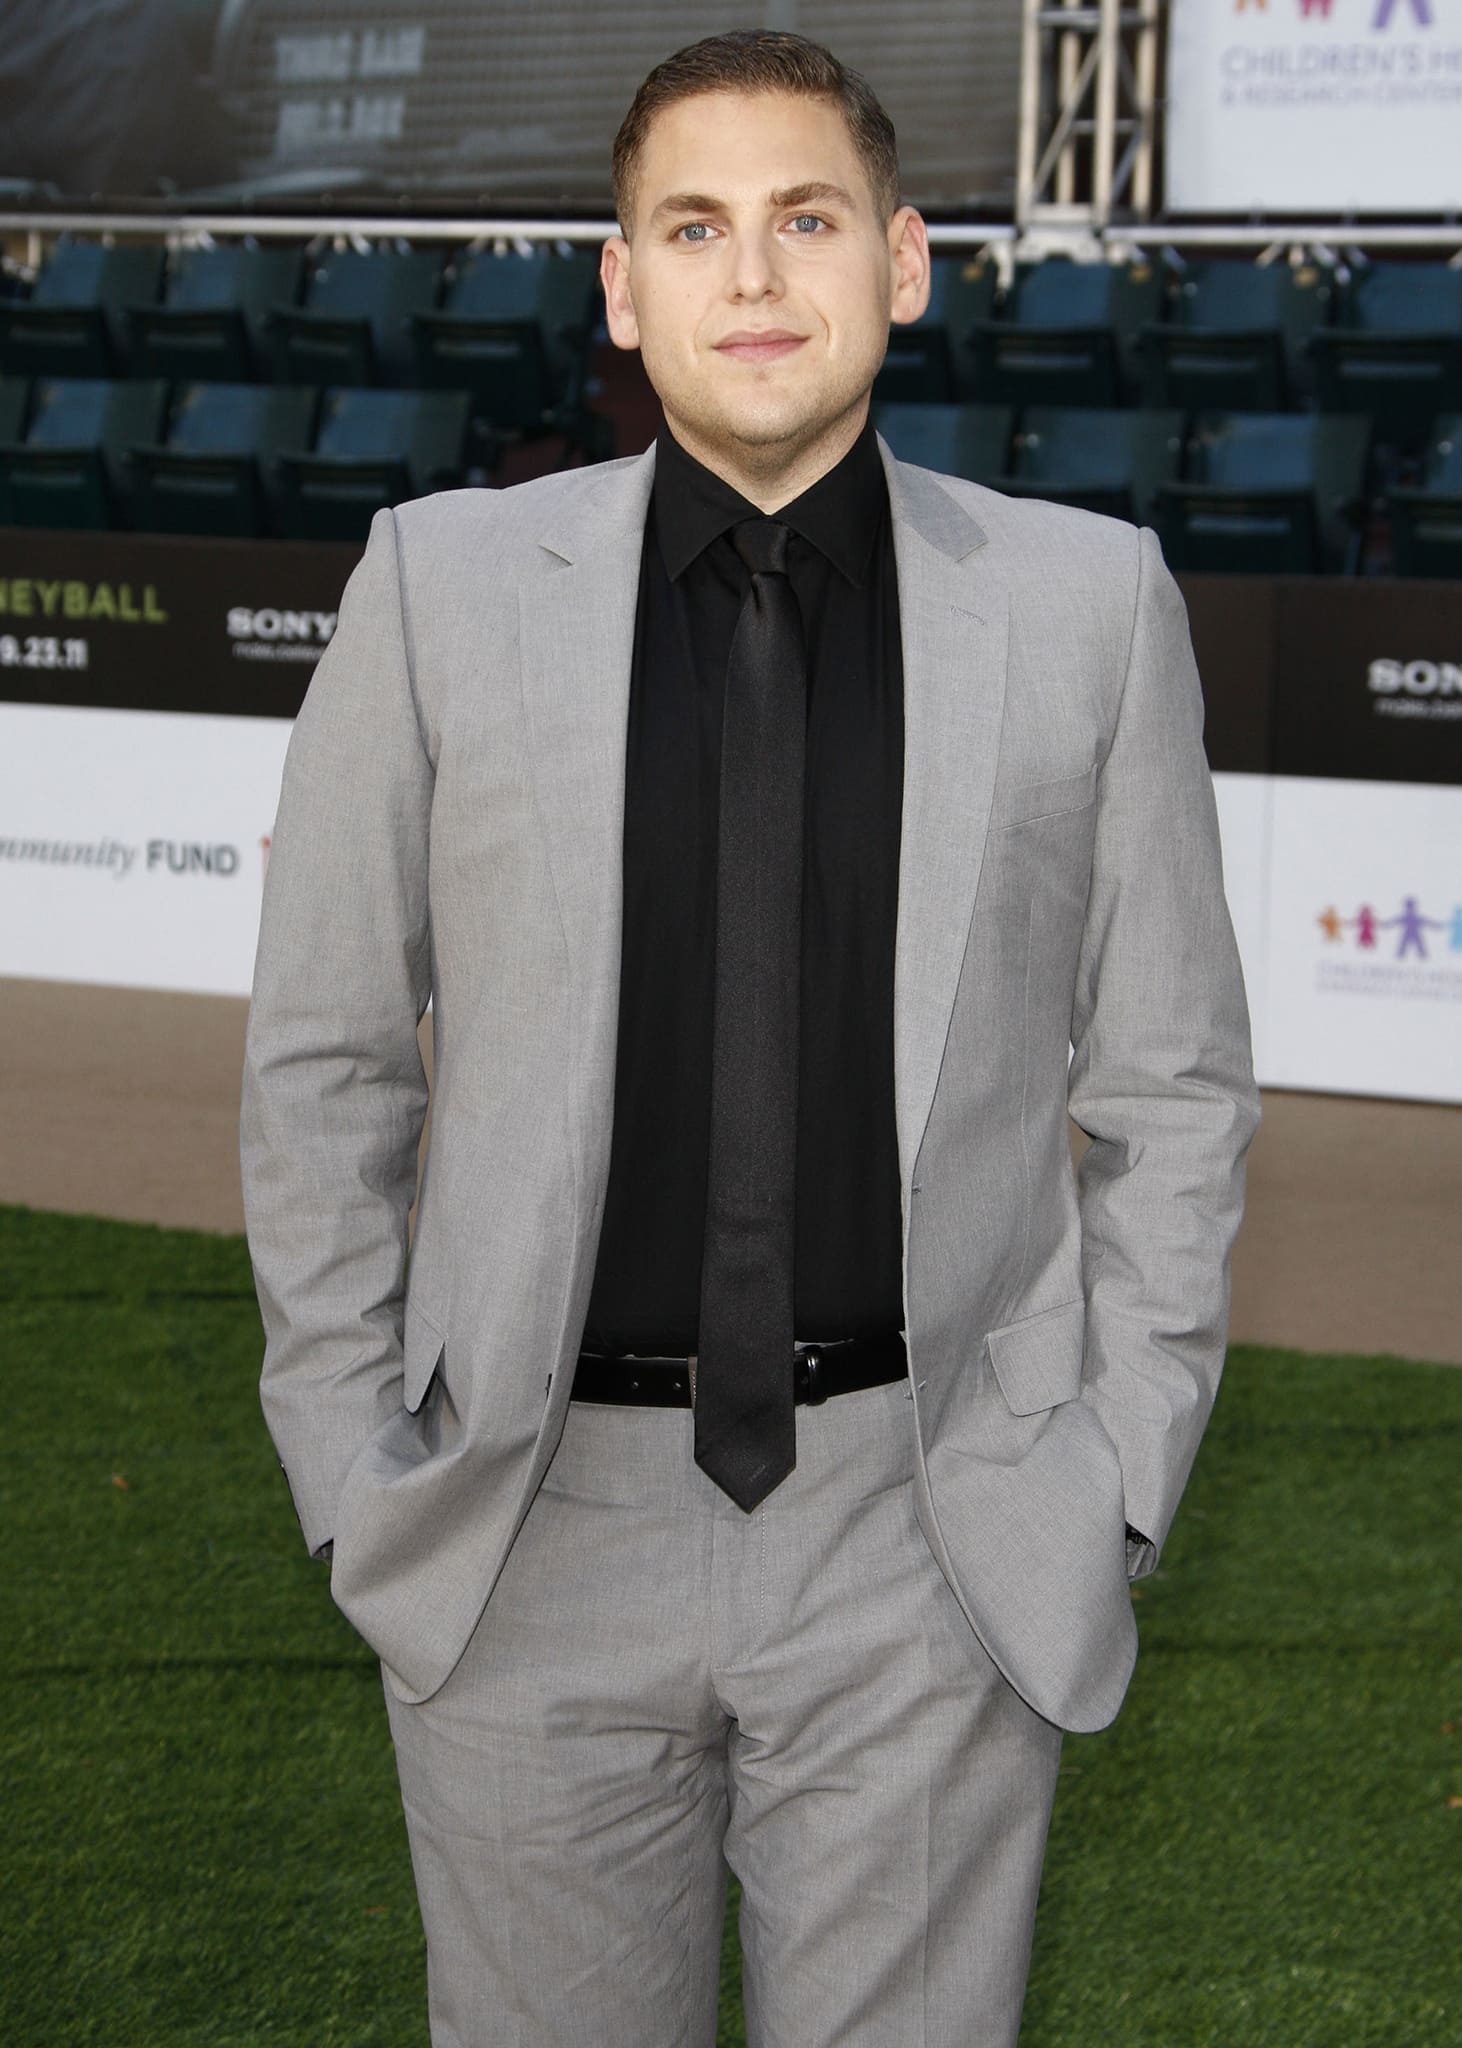 Jonah Hill surprised fans when he debuted a major weight loss at the 2011 premiere of Moneyball